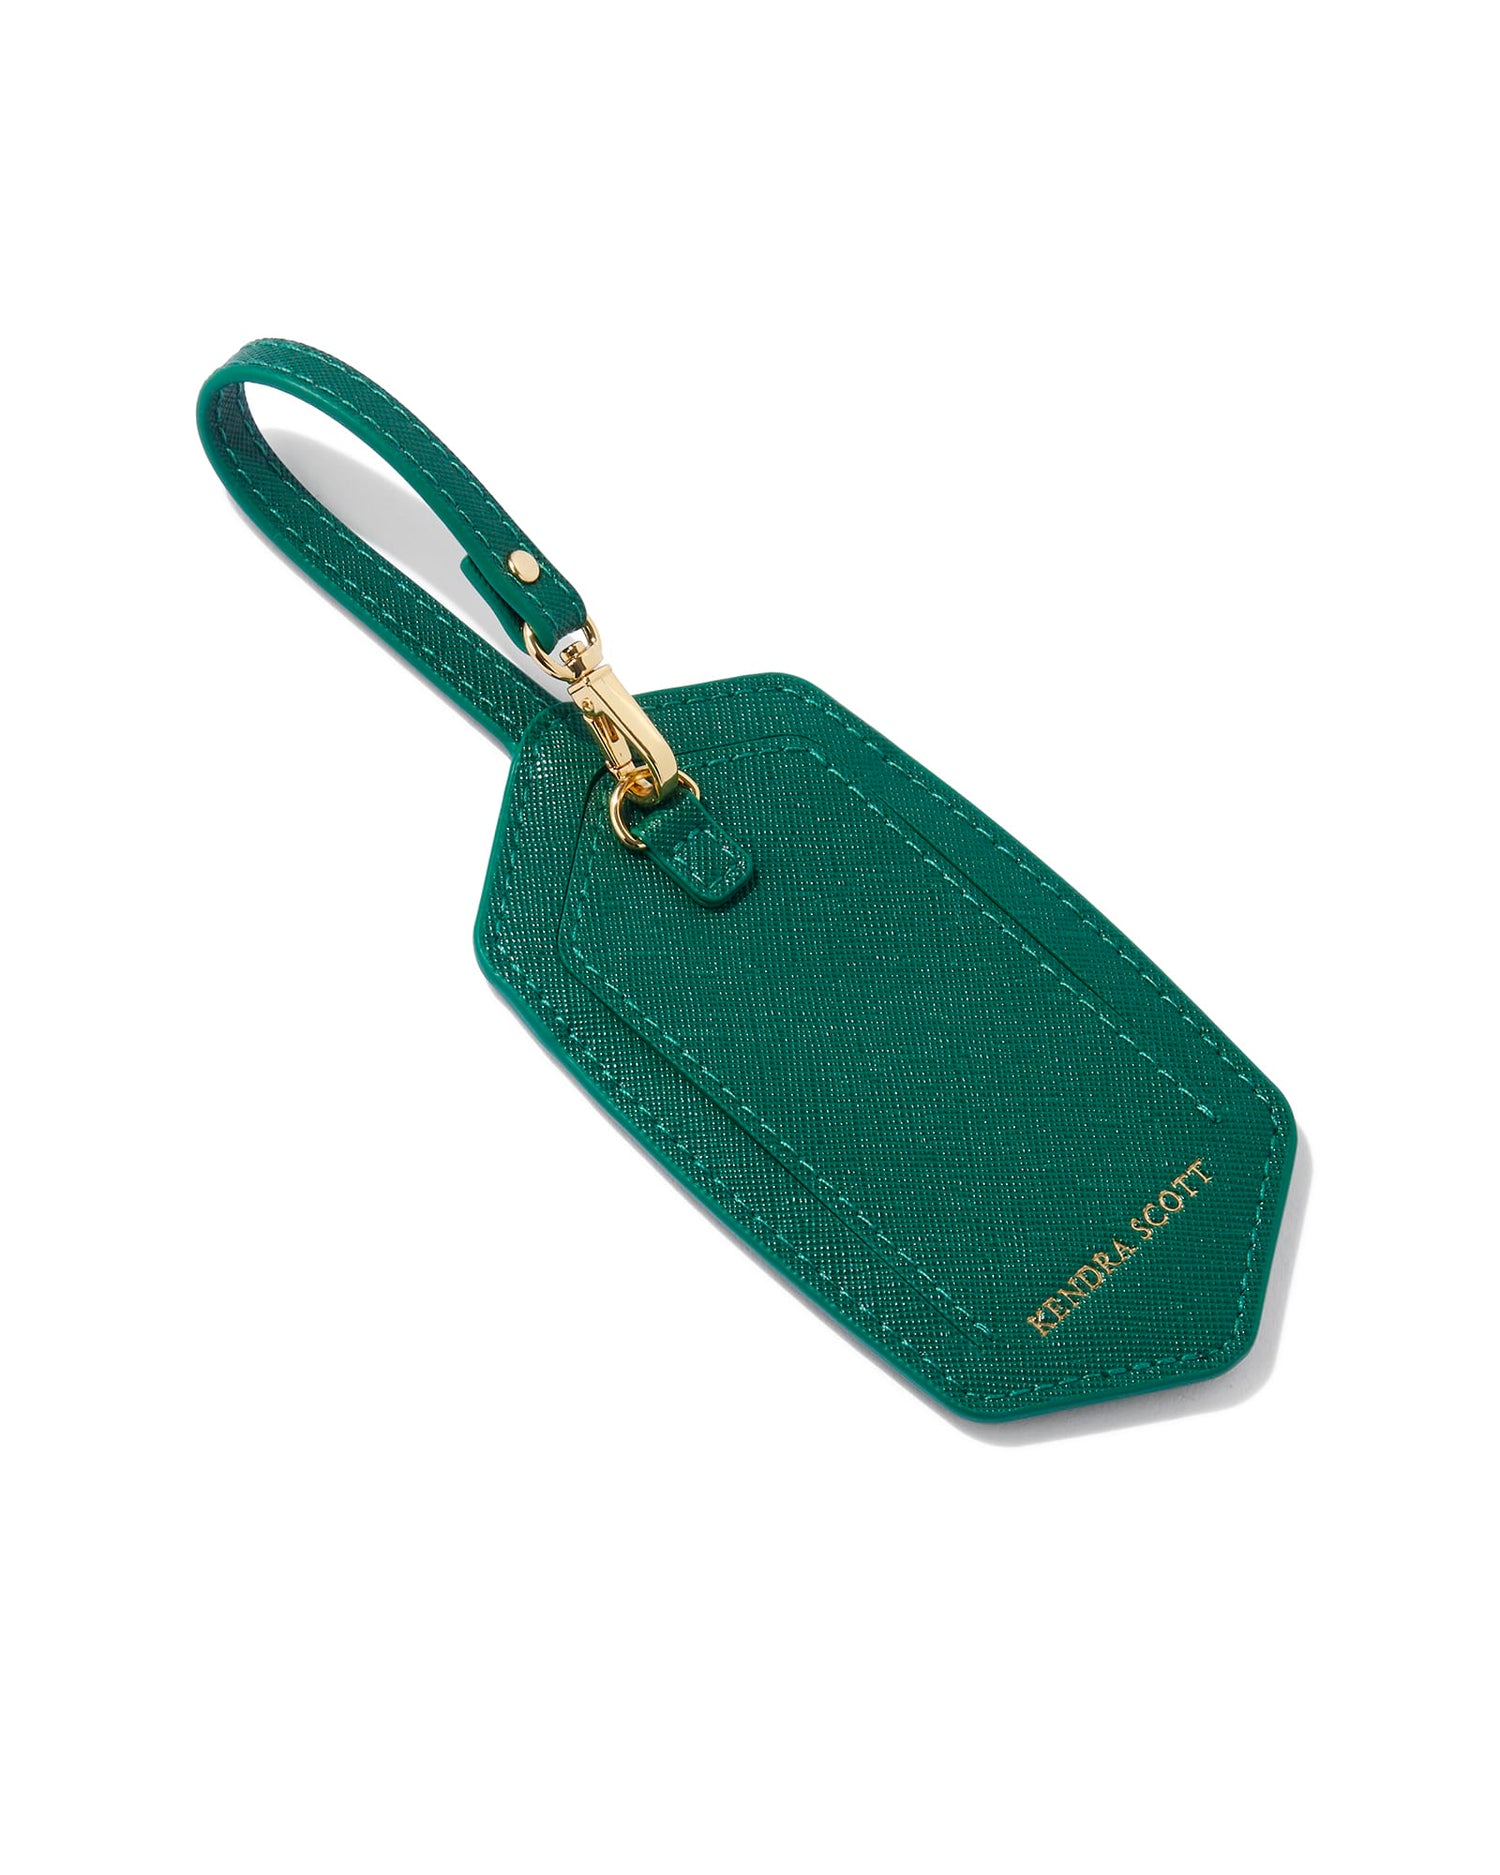 Green luggage tag 2.5" X 5.11" (10.4" with strap)